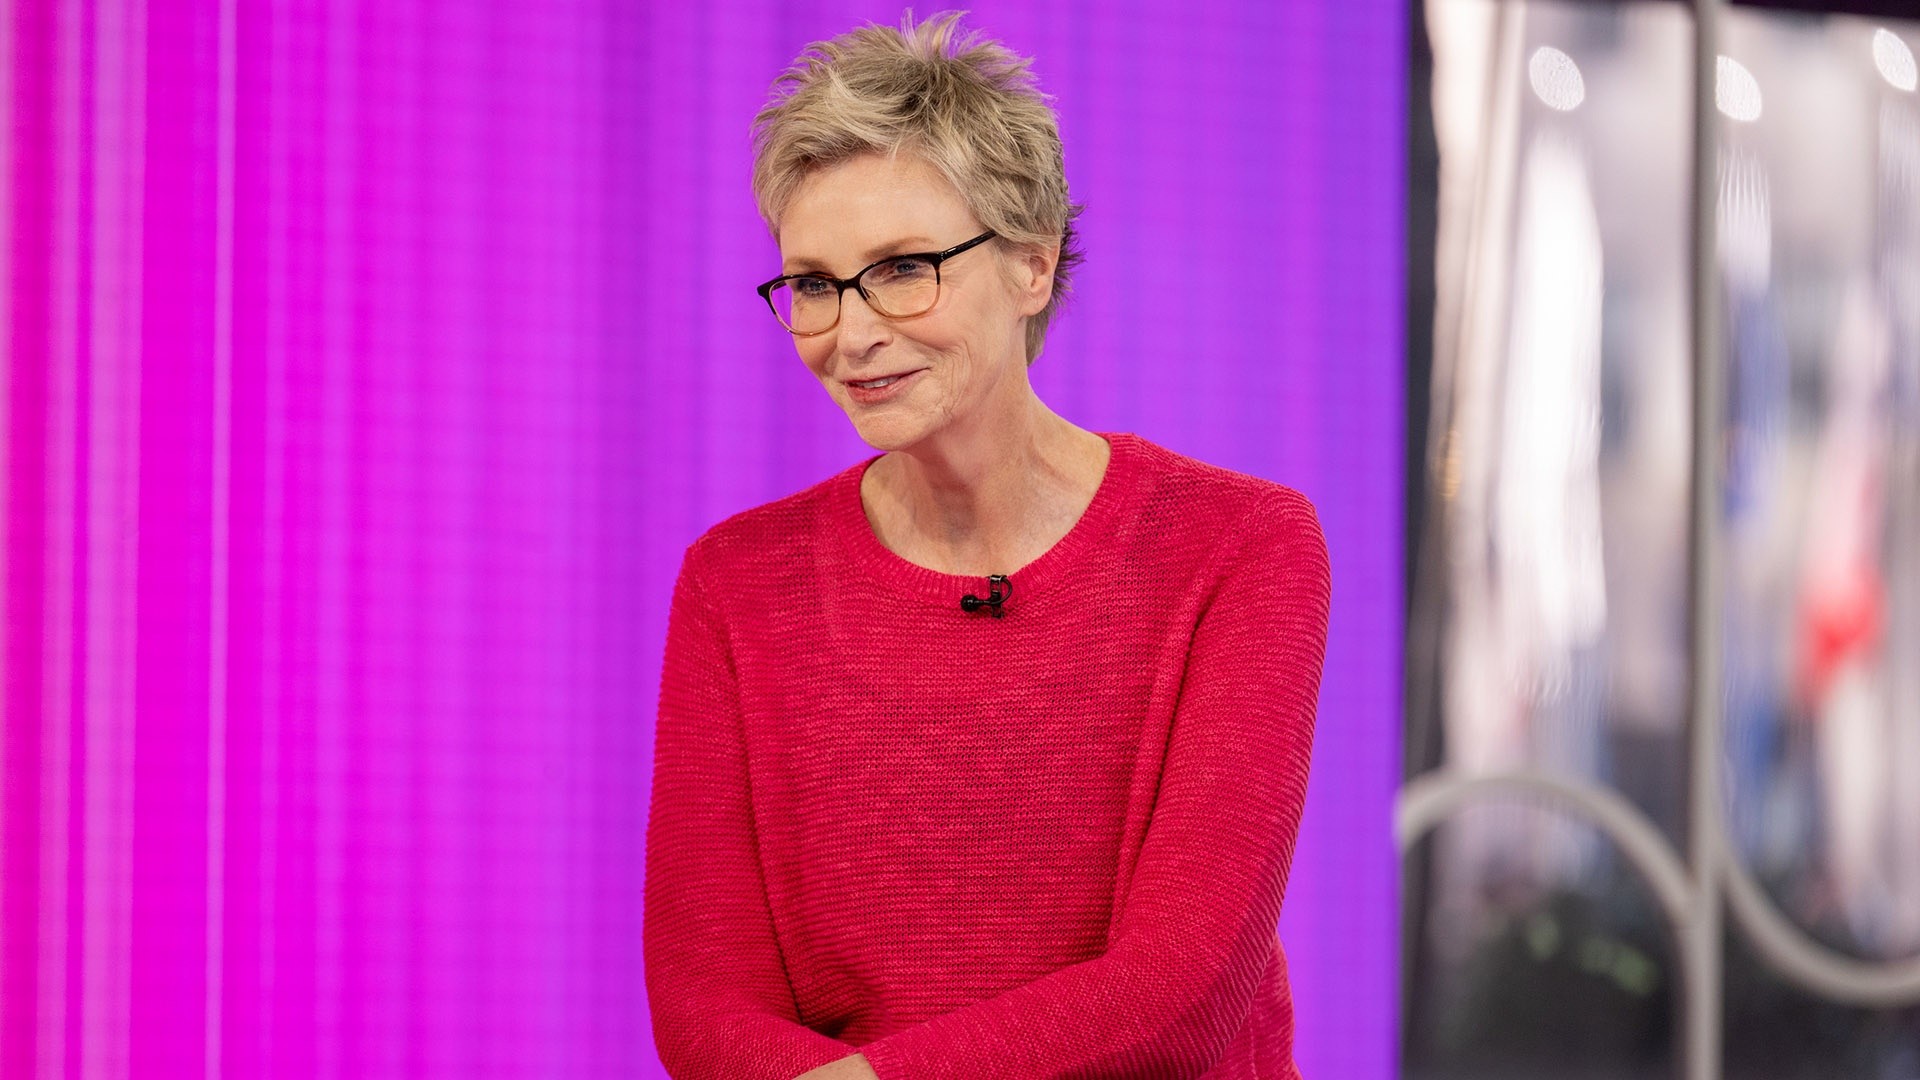 Jane Lynch on 'Weakest Link' persona: 'I love it so much'